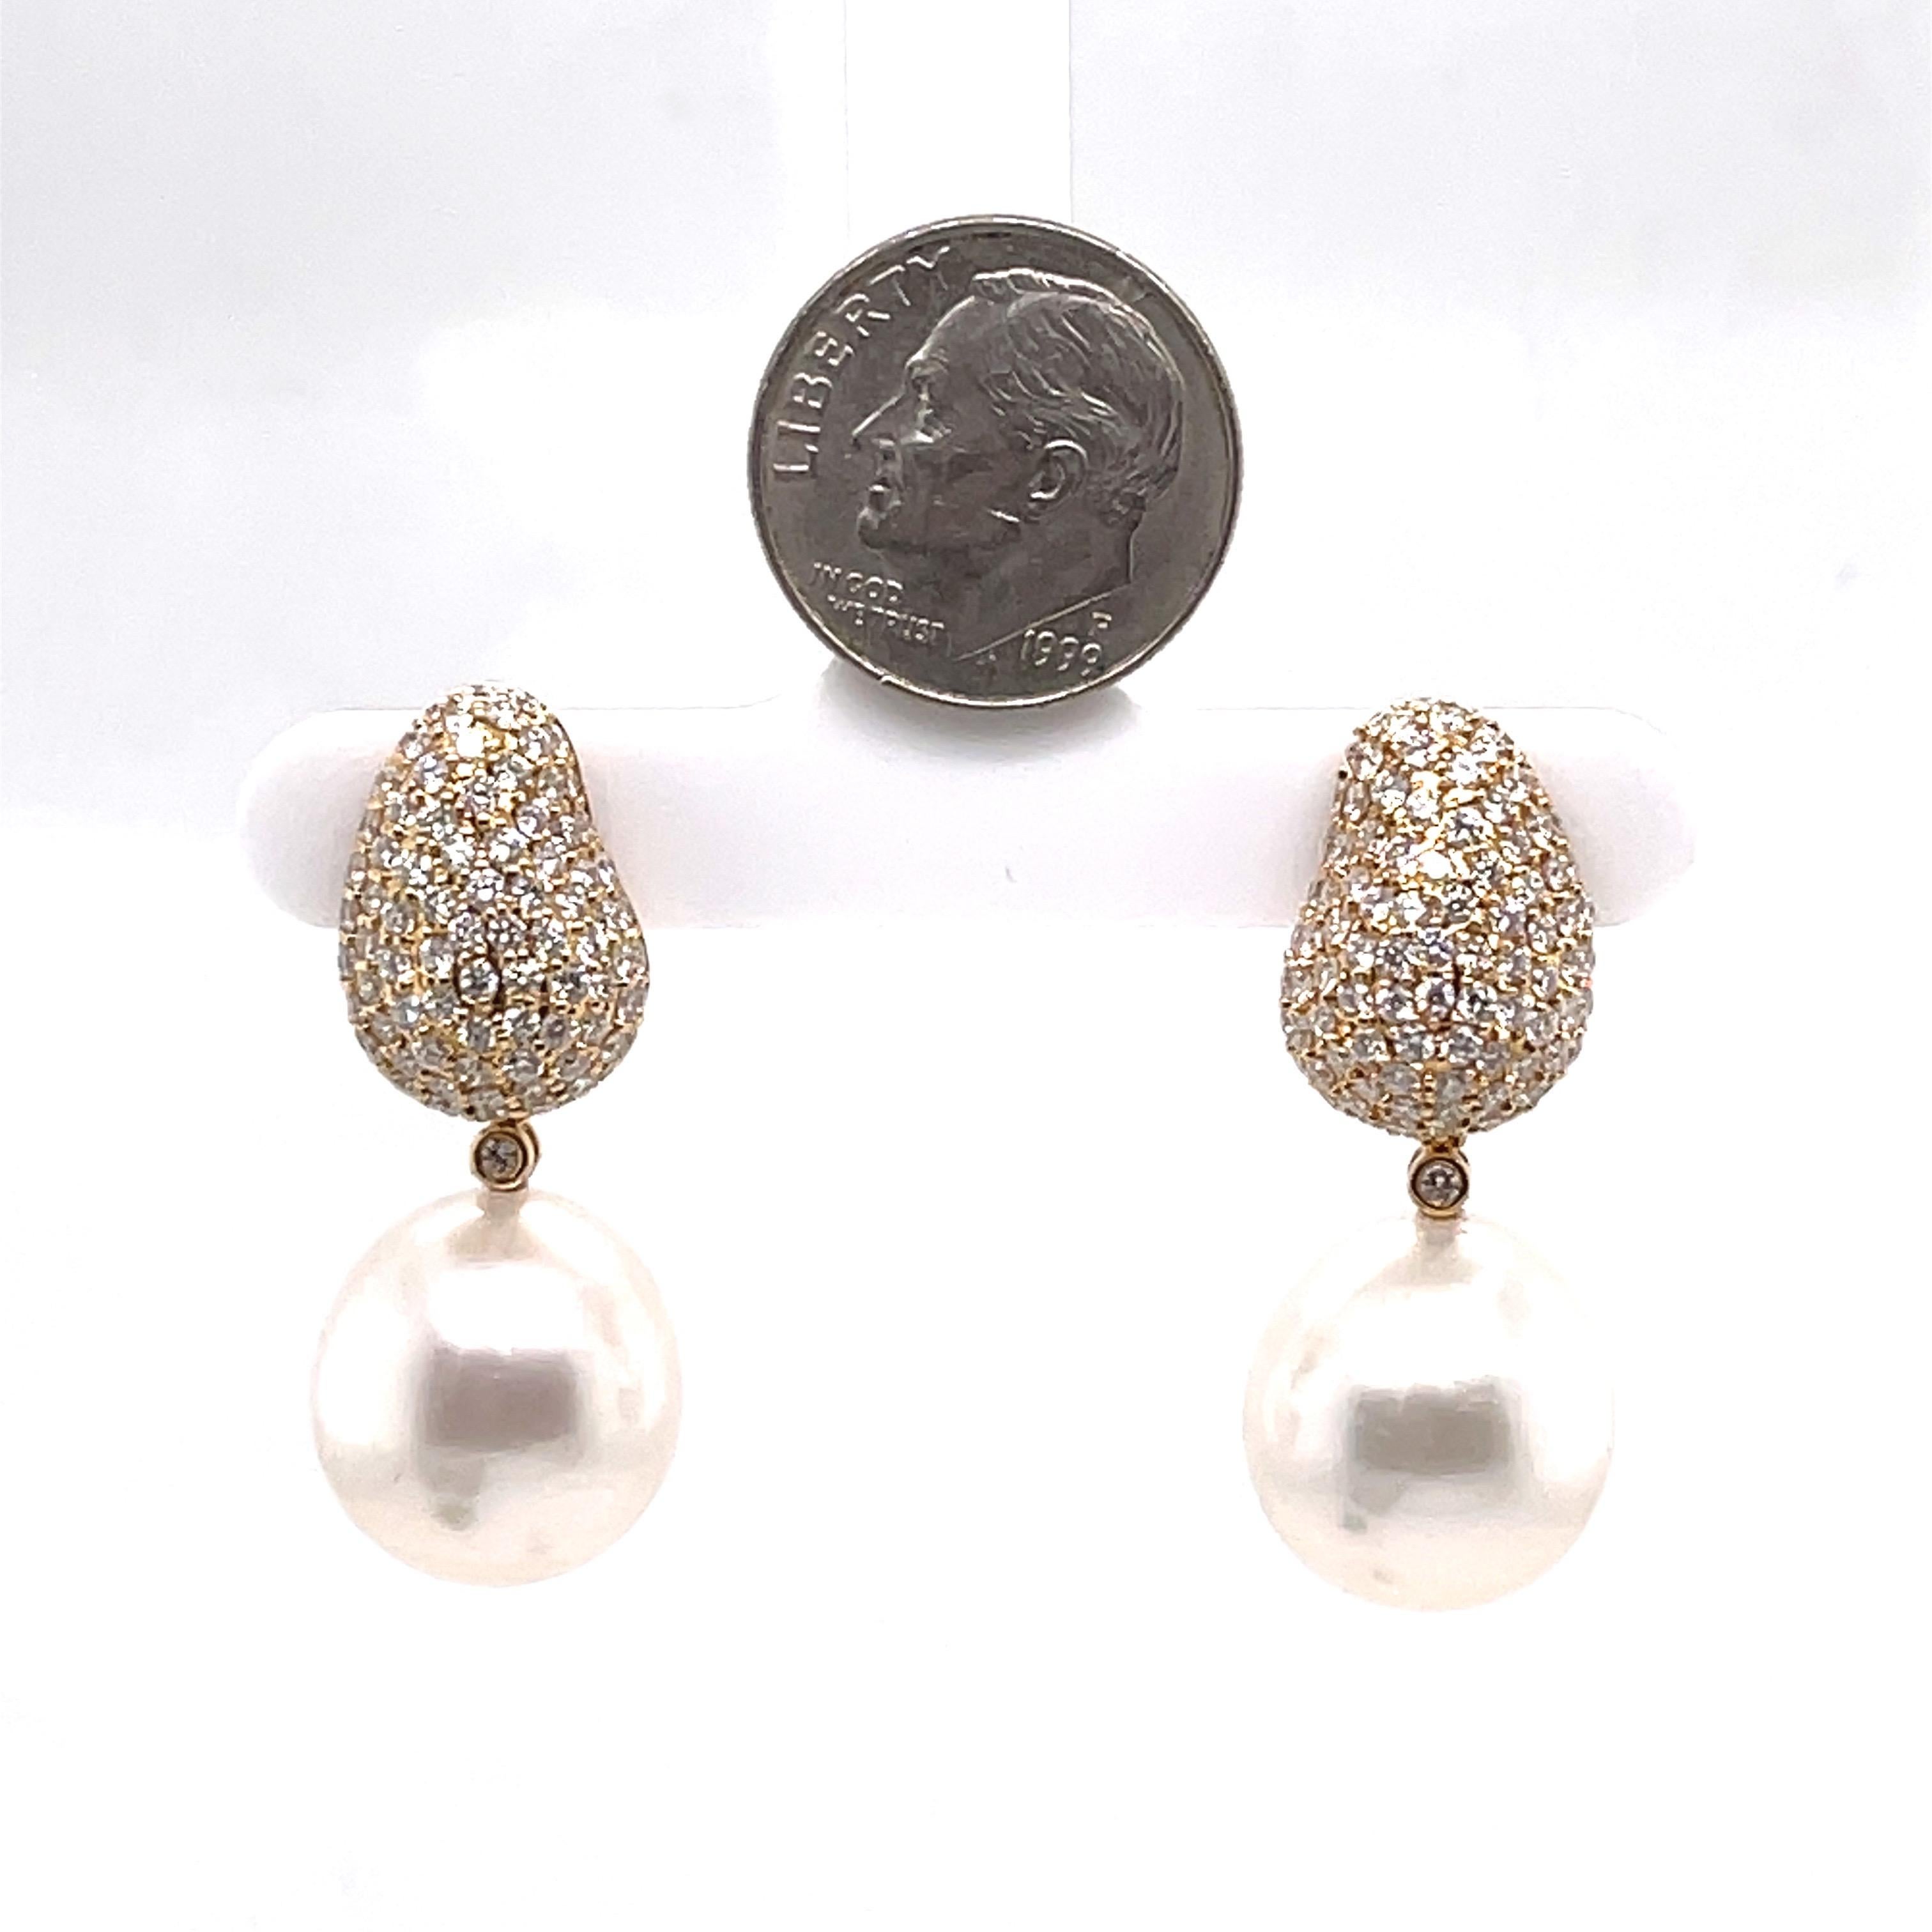 Push Back Post
2.32 Carat Diamonds
Can be worn as a drop earing or cluster diamond stud.
Pearl is Detachable.
18K Yellow Gold 
Measurements without pearl attachments:  16mm in length 11.2 width
